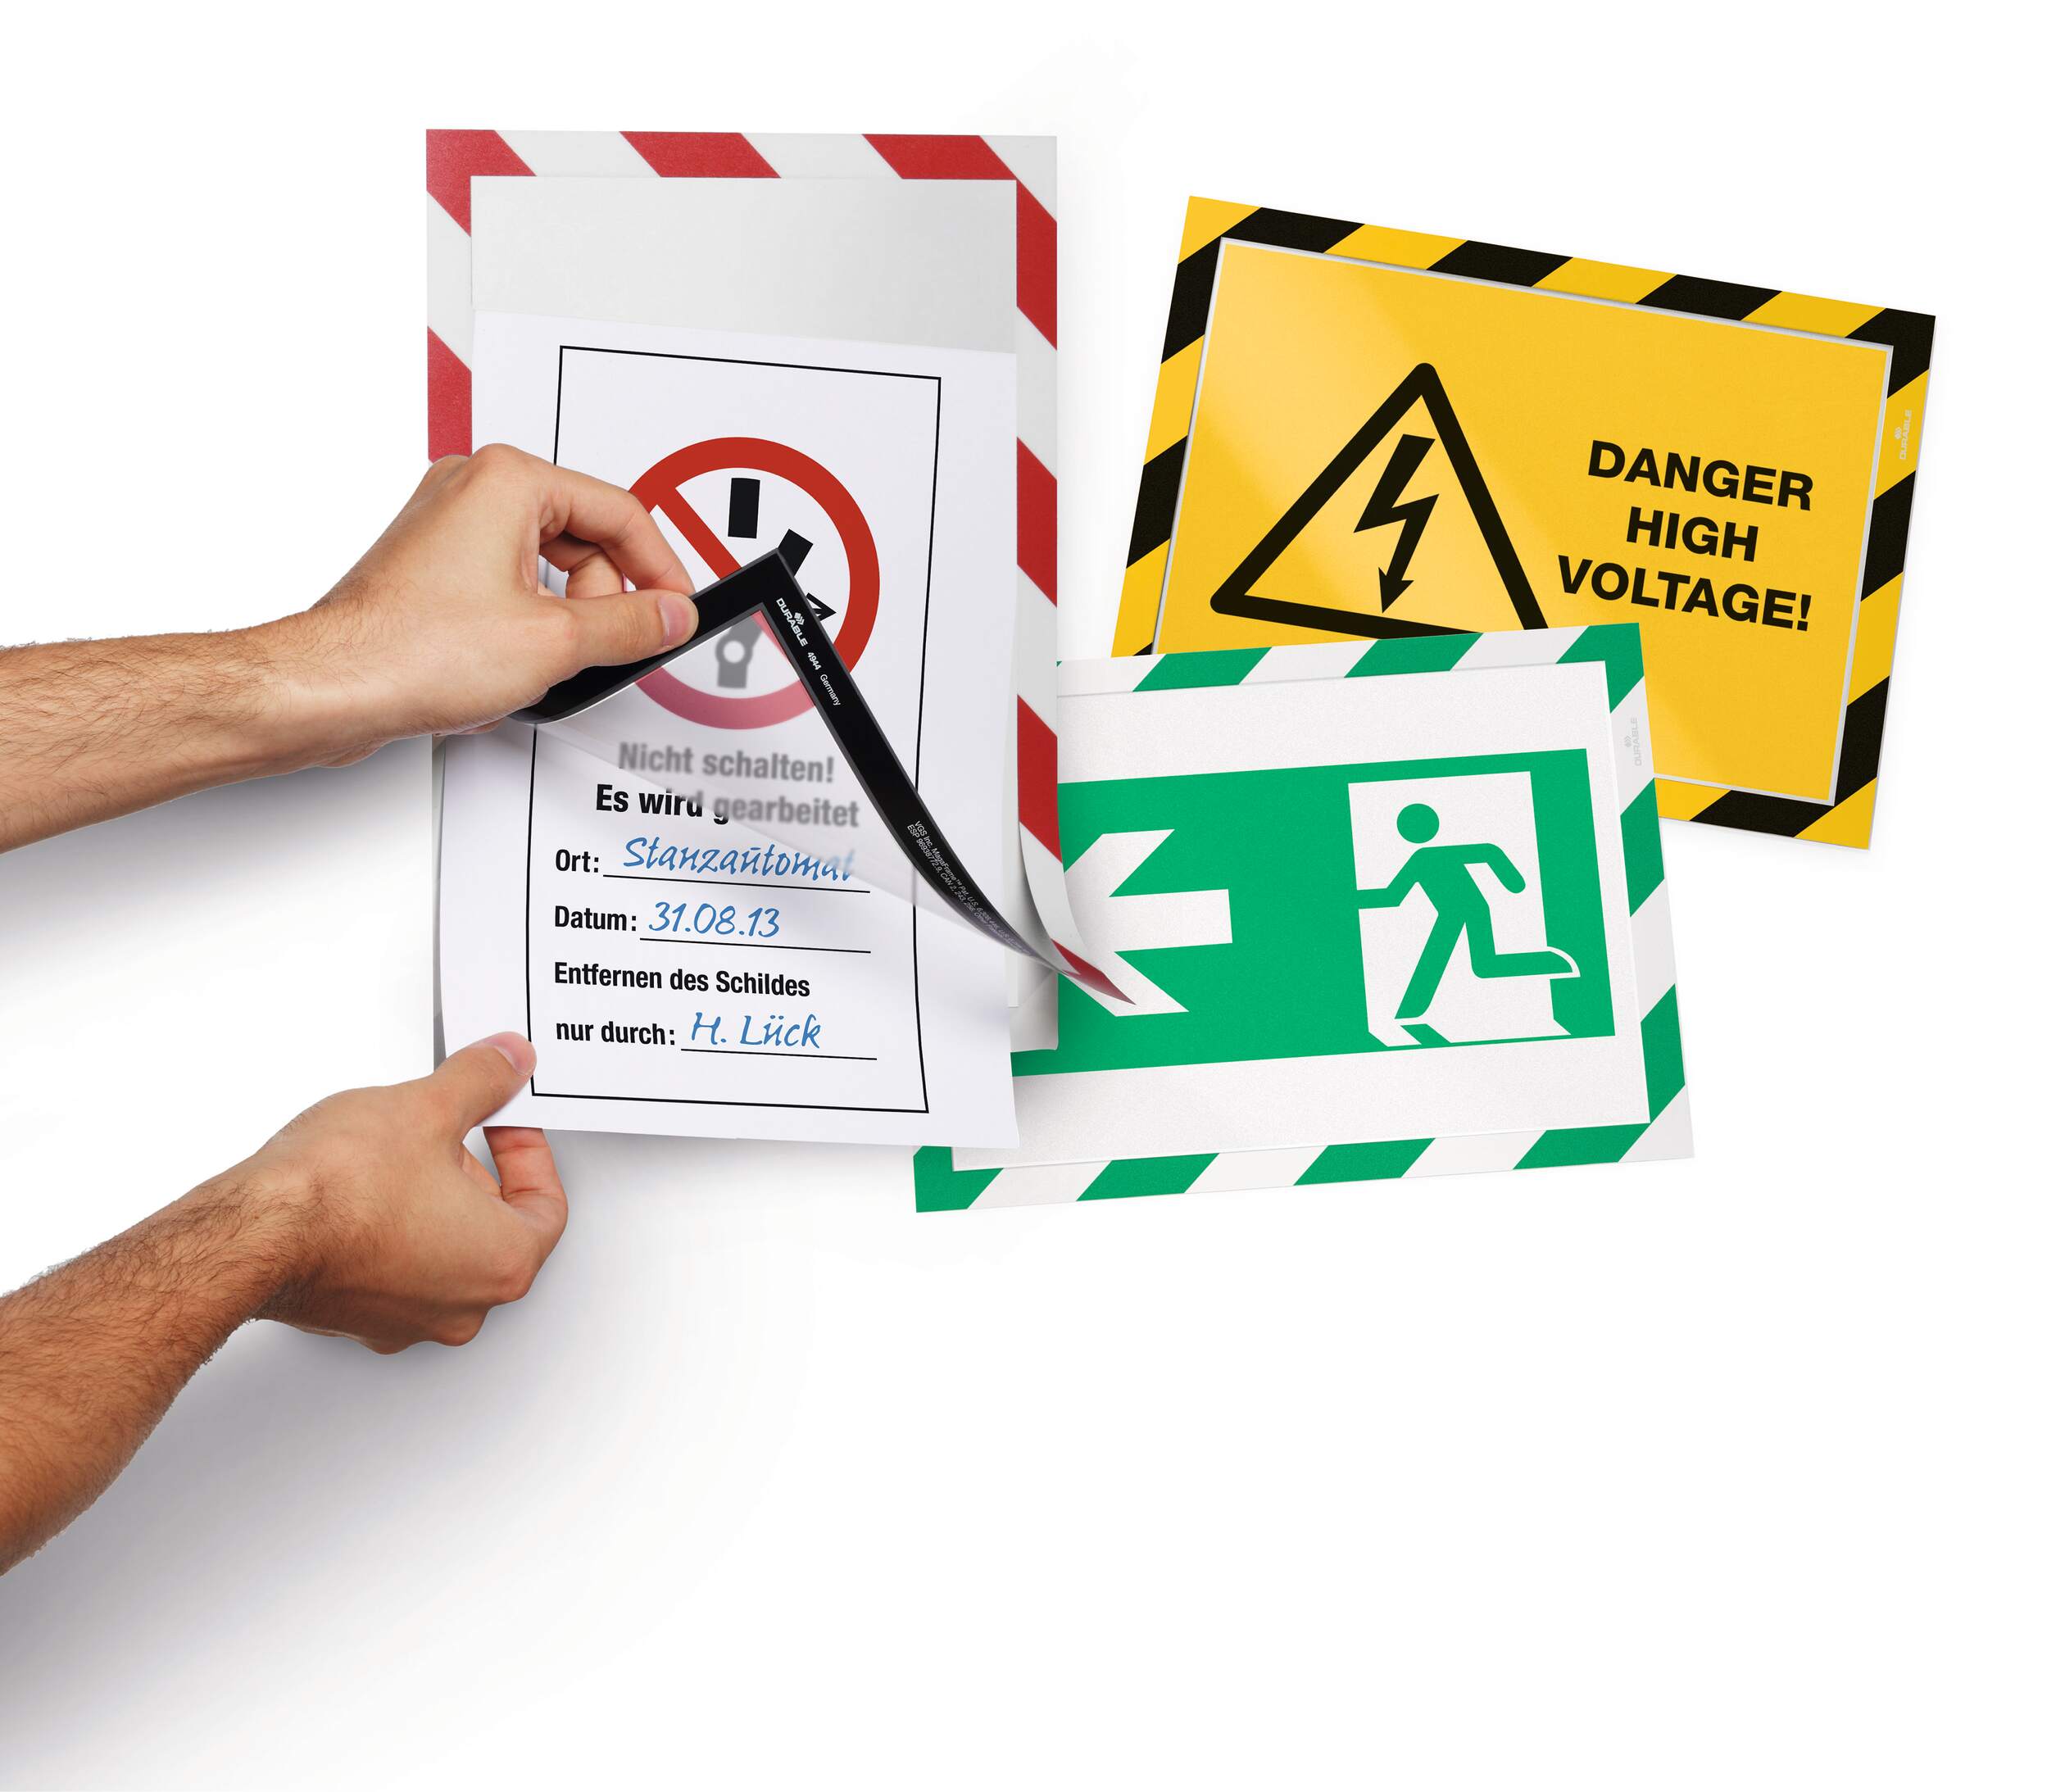 Self-adhesive double-sided A4 information frames in warning colors